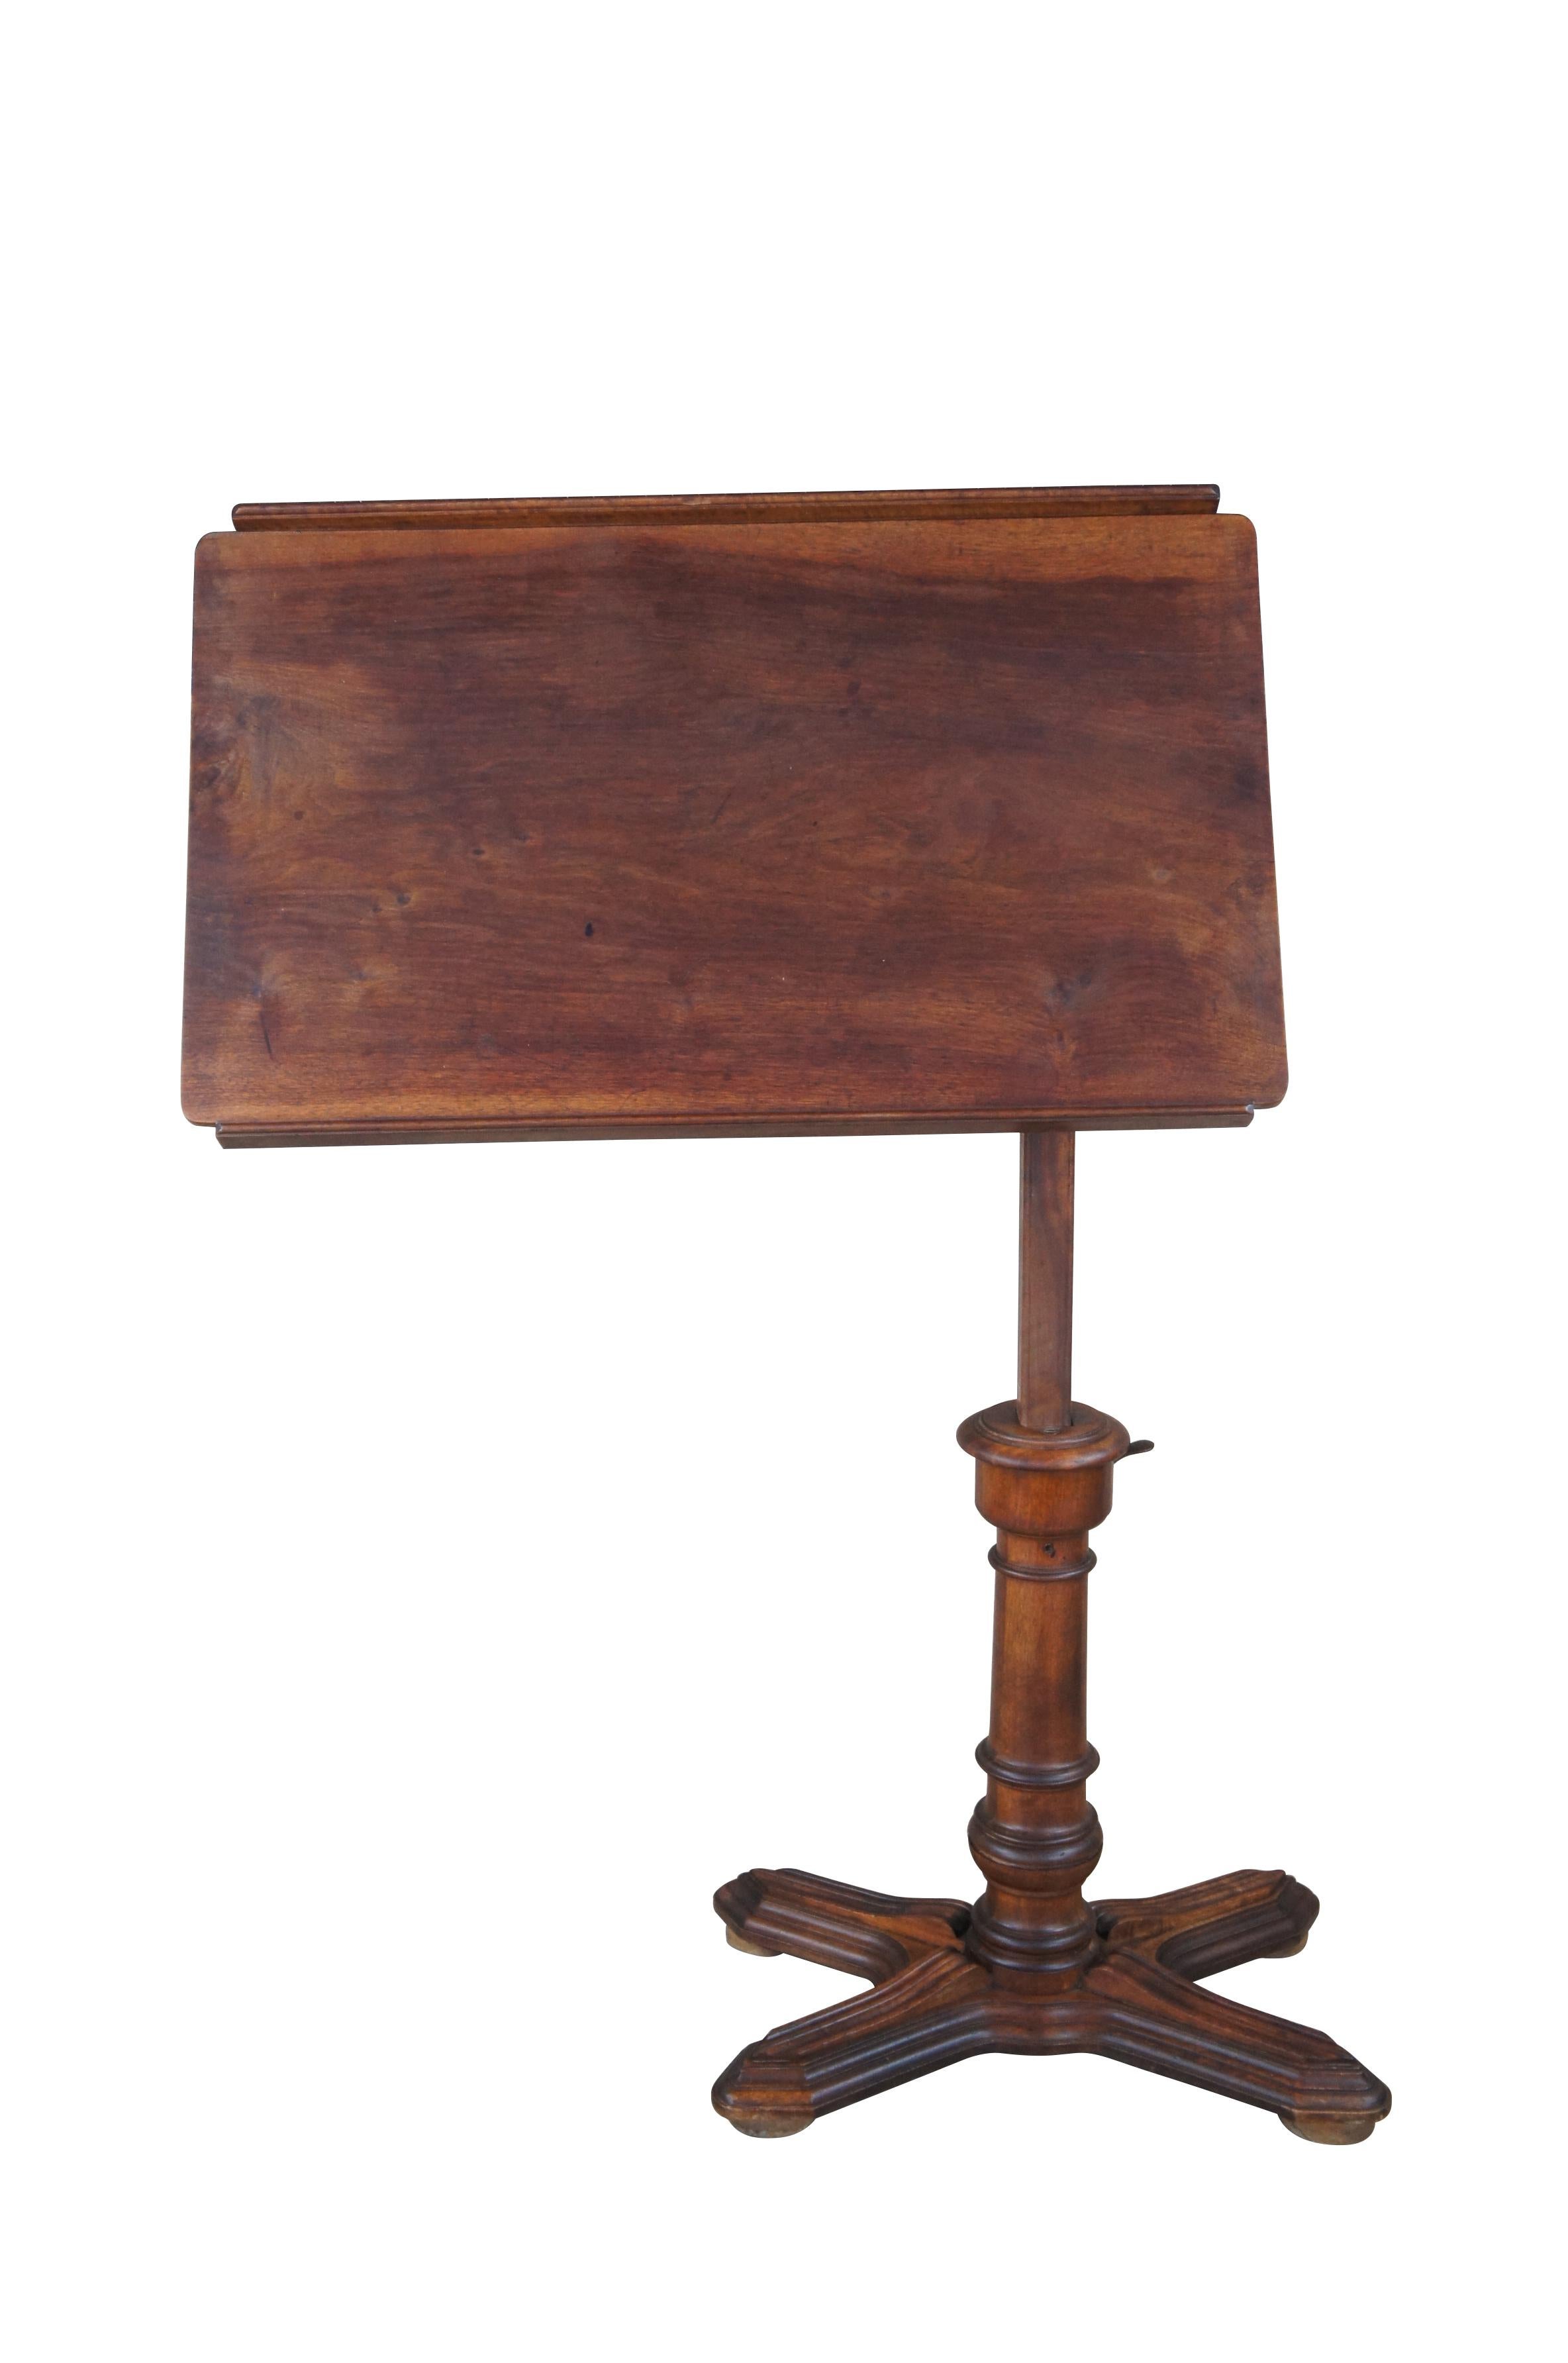 Victorian Antique 19thC Emile Chouanard French Walnut Lectern Drafting Table Easel For Sale